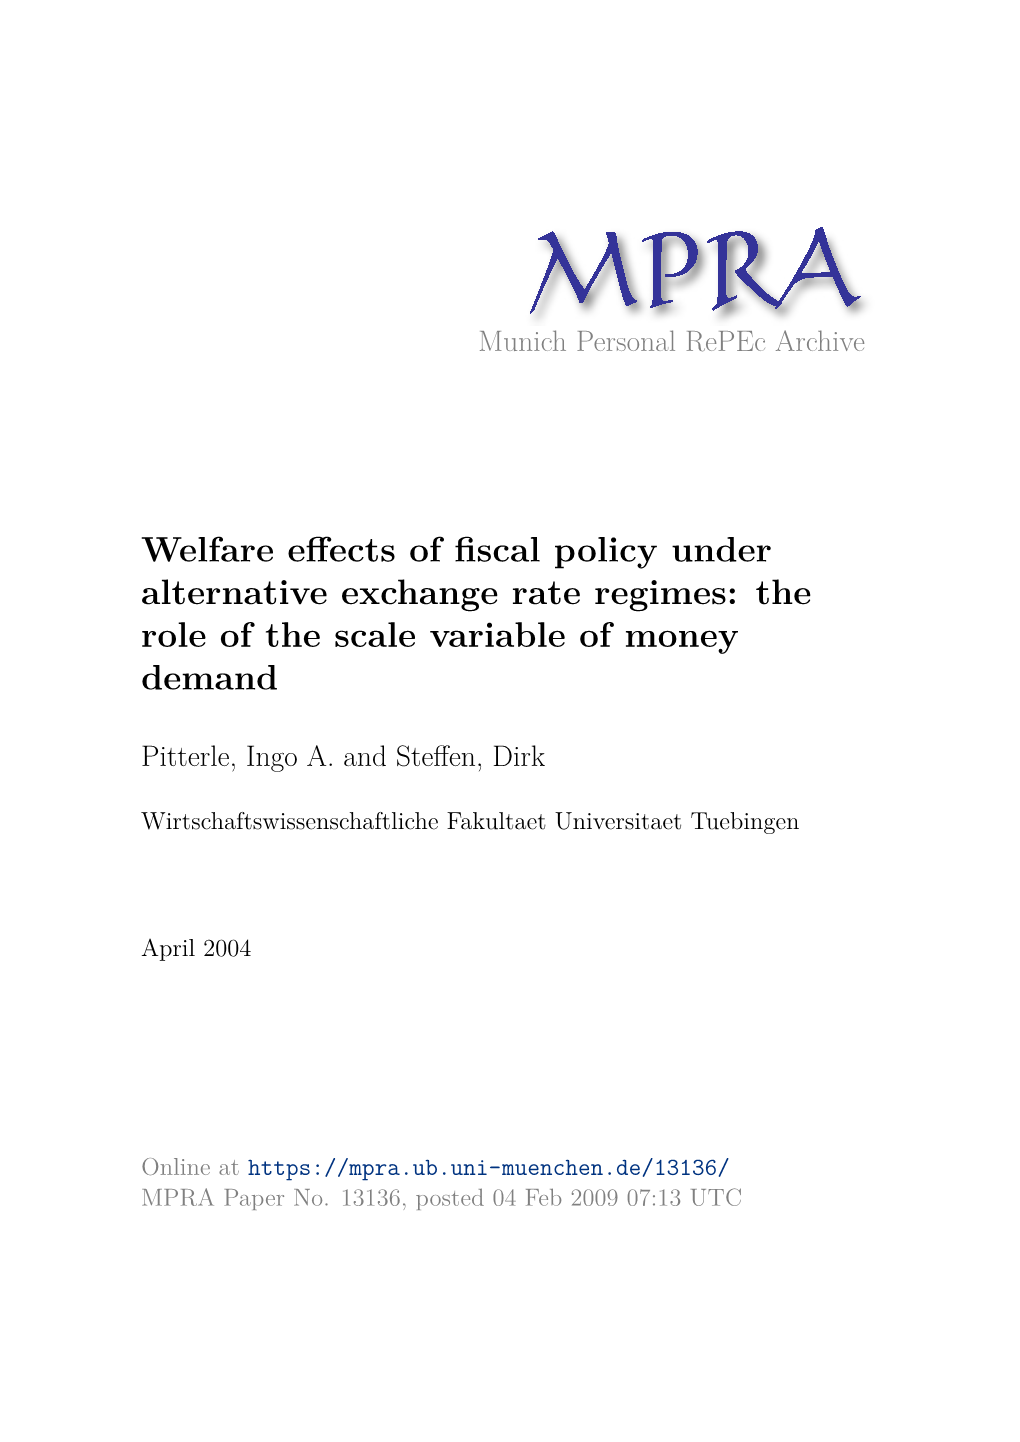 Welfare Effects of Fiscal Policy Under Alternative Exchange Rate Regimes: the Role of the Scale Variable of Money Demand